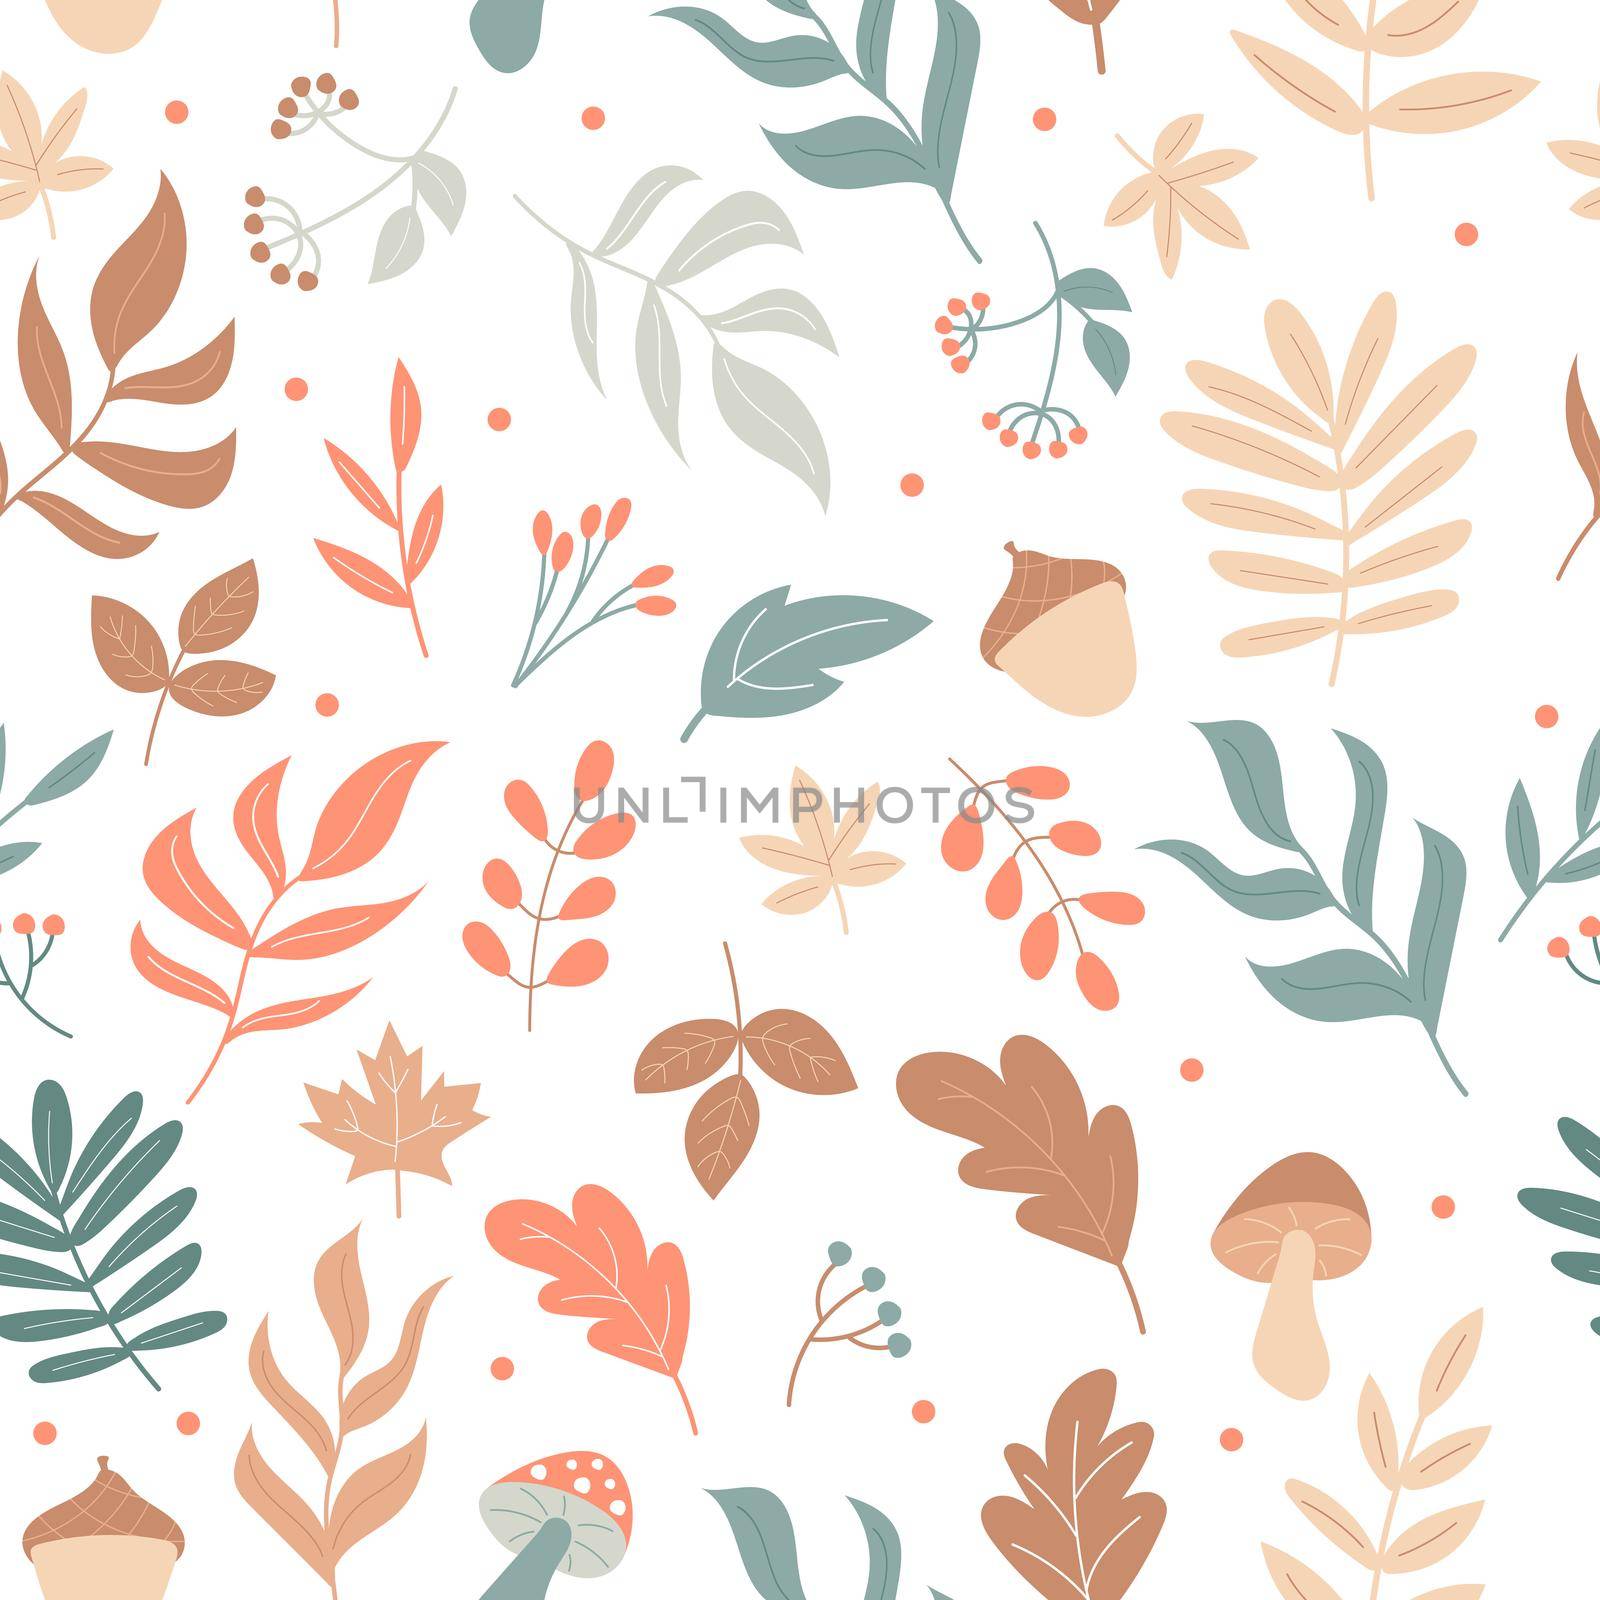 Autumn elements seamless pattern. Endless pattern for packaging by natali_brill